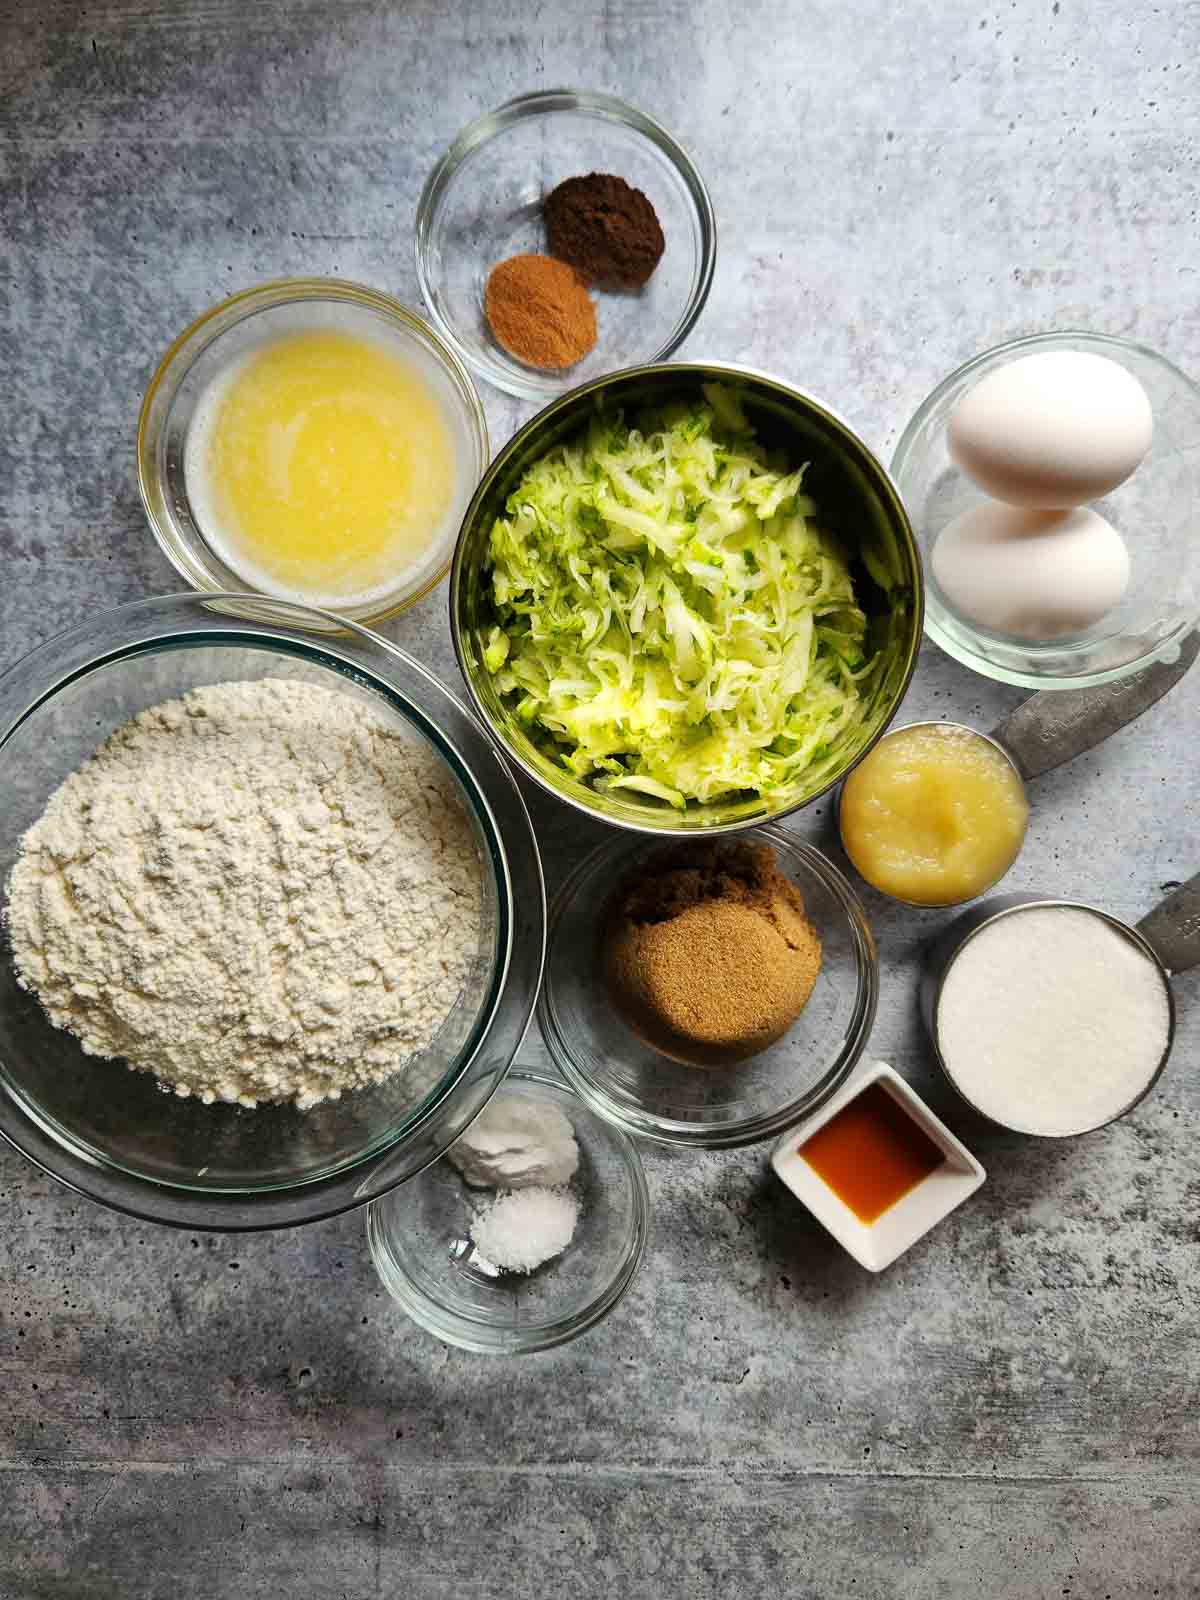 Ingredients for zucchini muffins on a concrete surface.